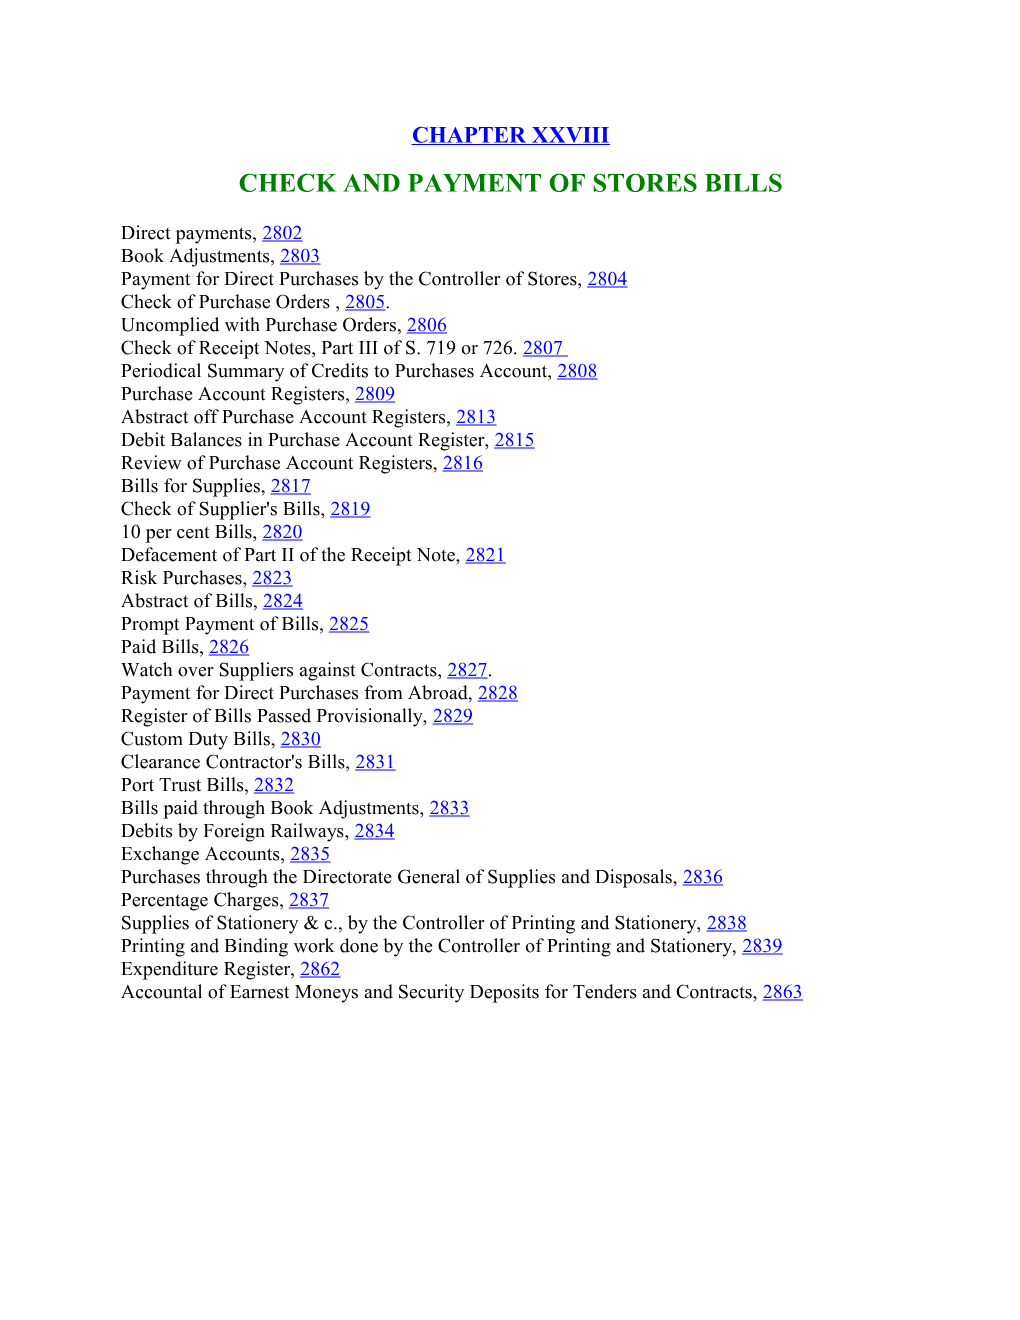 Check and Payment of Stores Bills